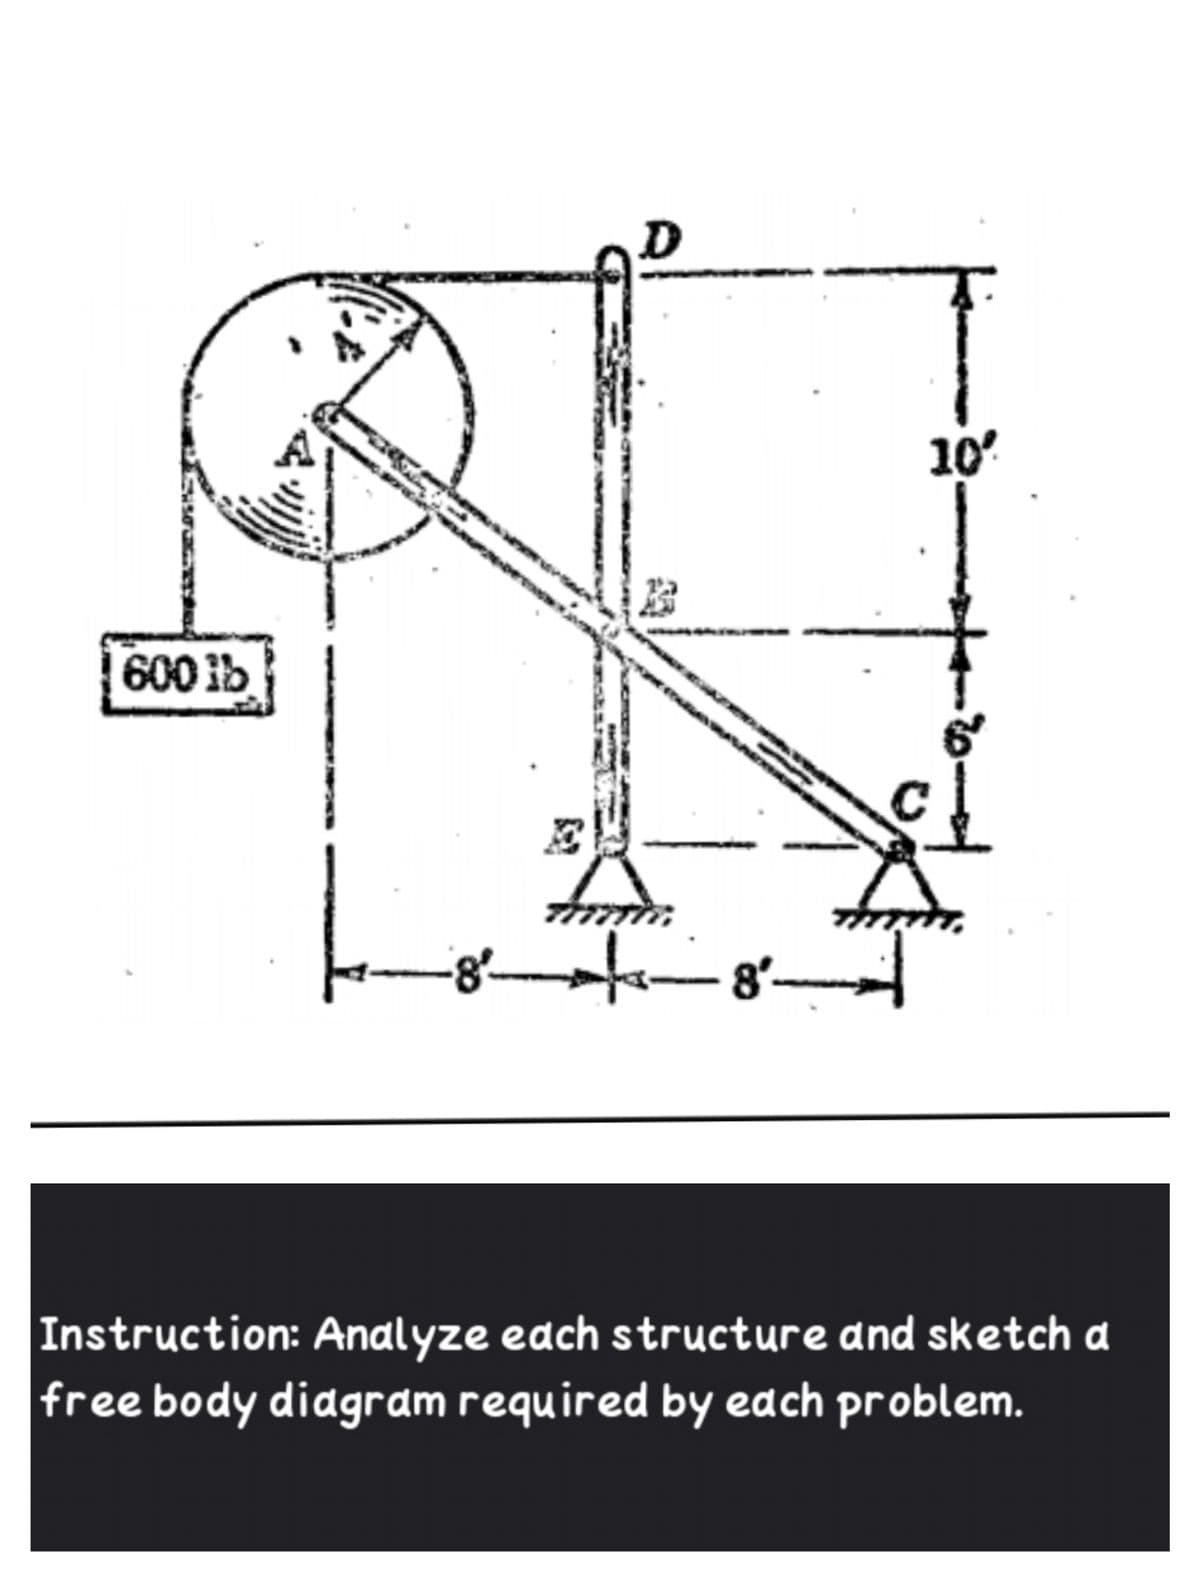 10
600 ib
Instruction: Analyze edch structure and sketch a
free body diagram required by each problem.
